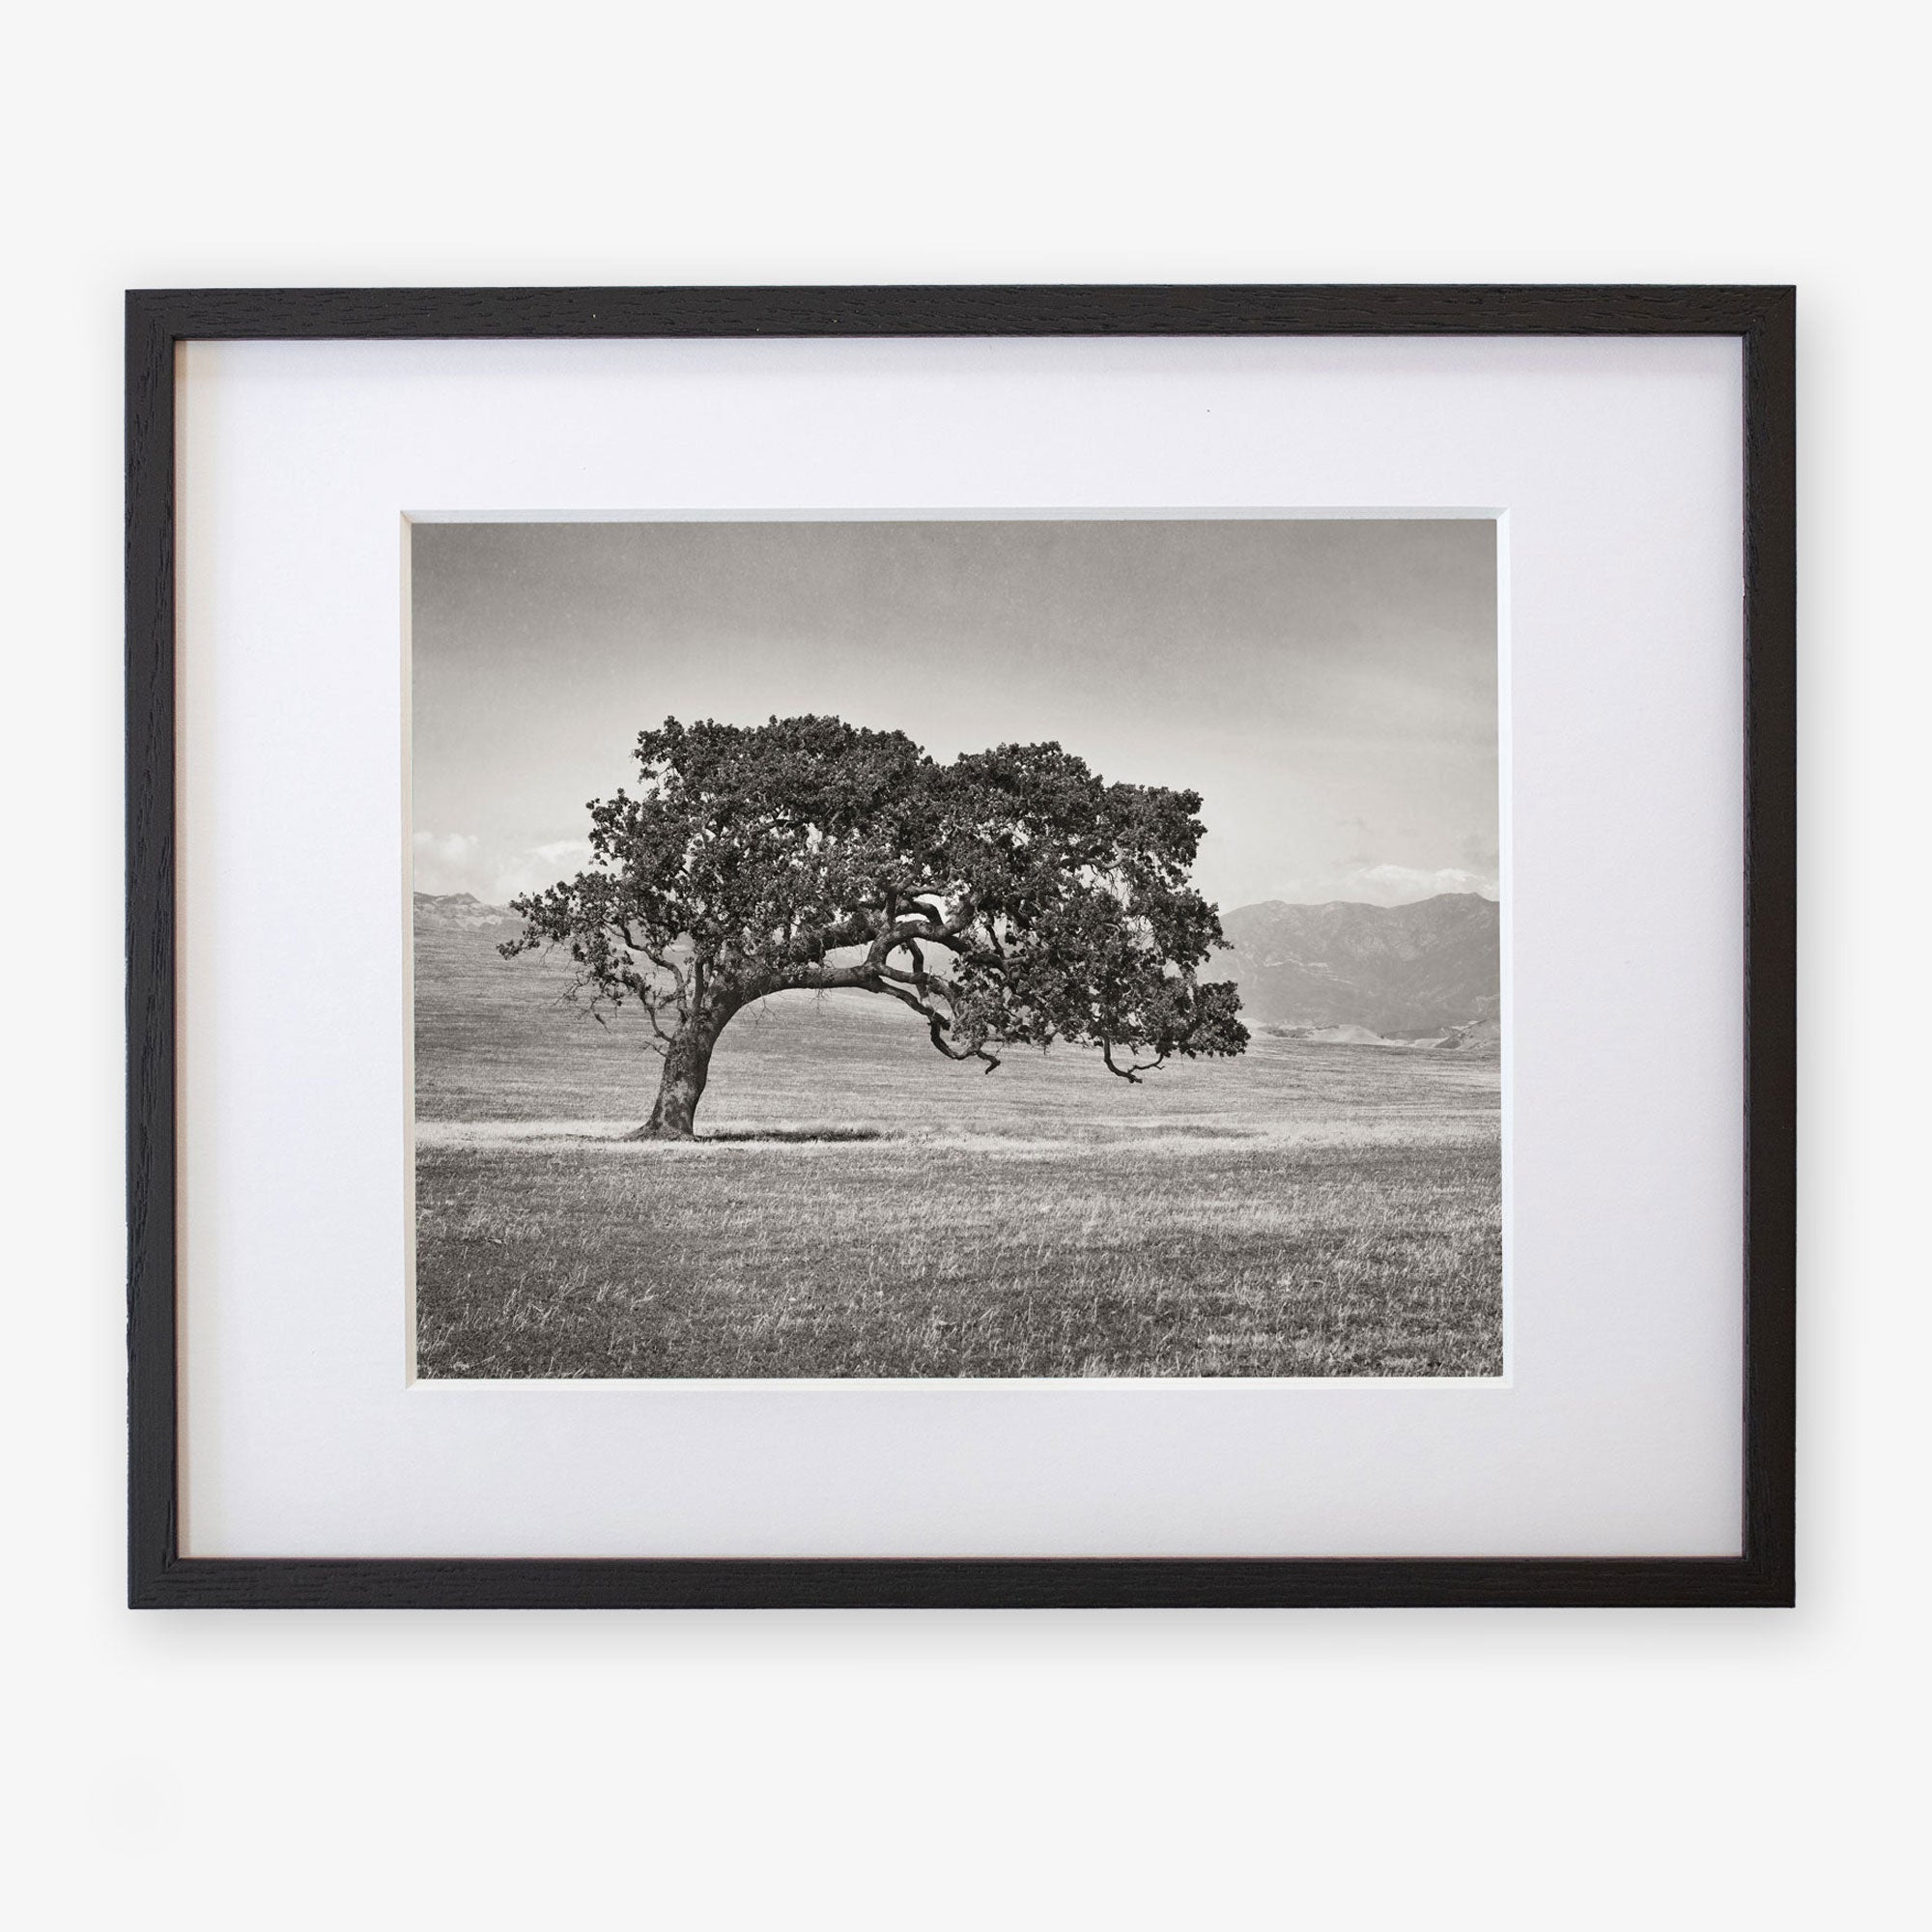 A black and white photograph of a solitary, windswept Californian Oak Tree landscape, framed in black and mounted with a white border, displayed in an elegant dark Offley Green frame.